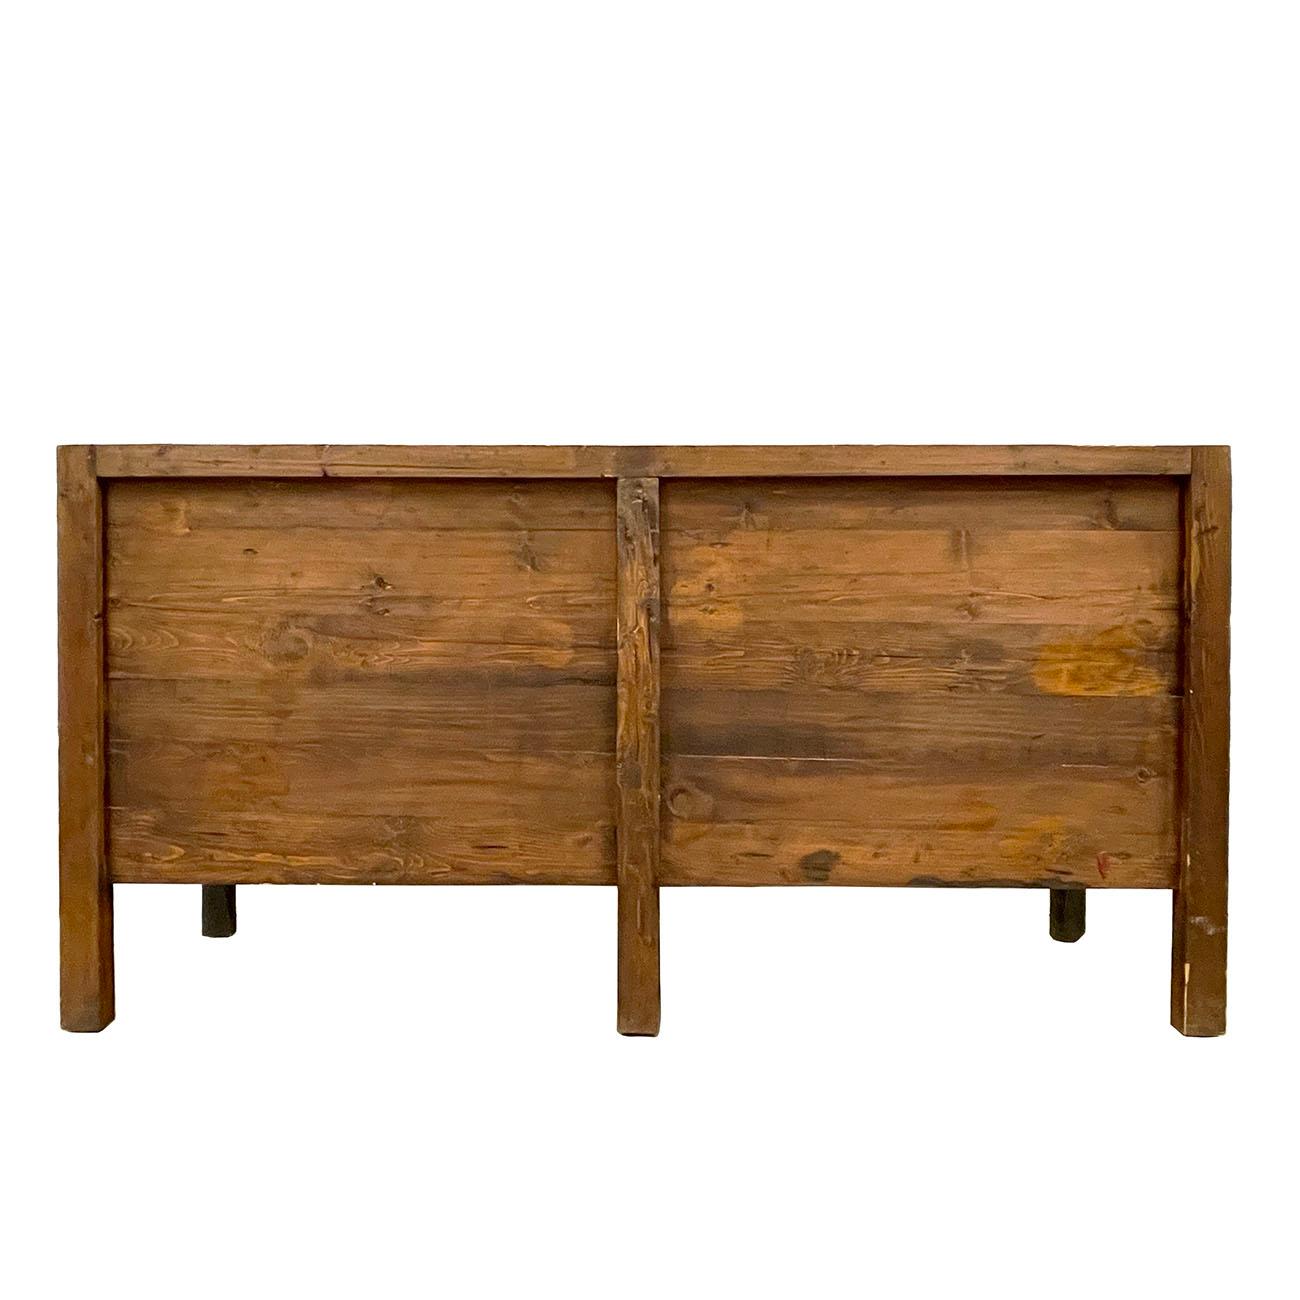 Late 19th Century Antique Chinese Mongolia Credenza, Sideboard, Buffet Table For Sale 7